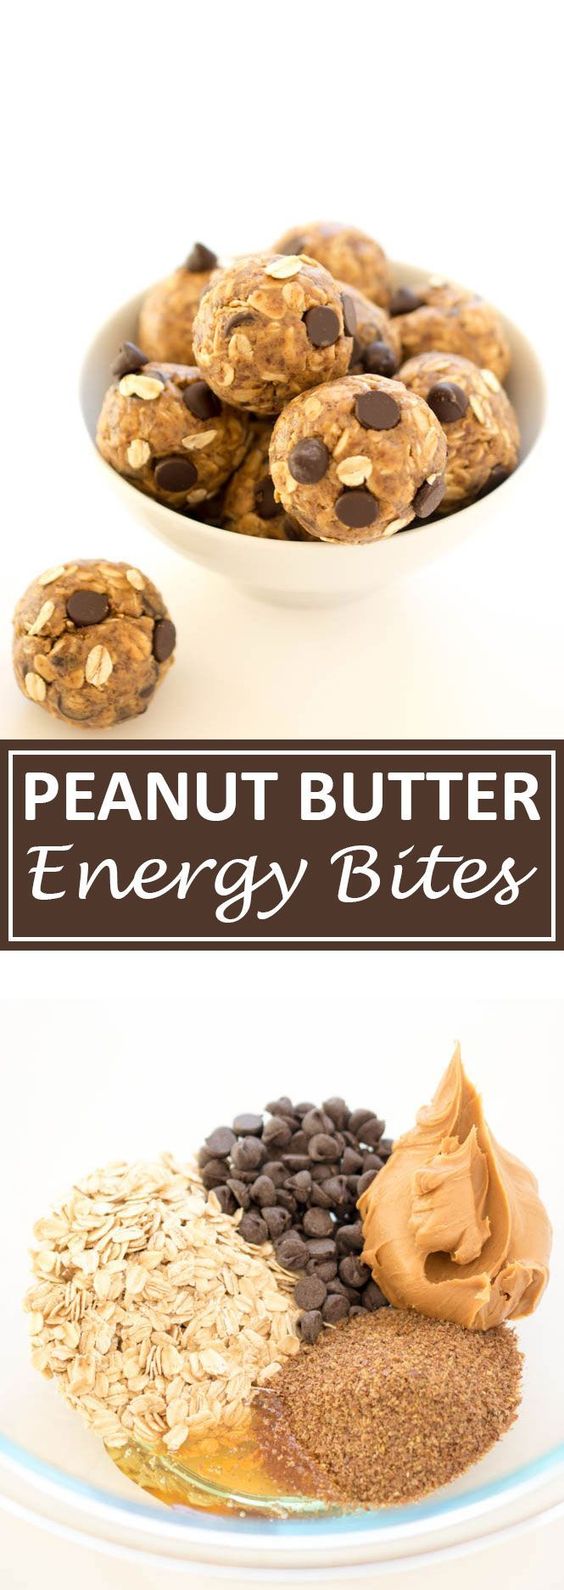 Healthy snacks: Peanut Butter bites | Energy boosting healthy snack recipe | Find new ideas for healthy snacks to try at home. #healthyliving #healthylifestyle #healthyrecipes #healthy #nutrition #mealprep #wellness #fitnessgoals #weightloss #highprotein